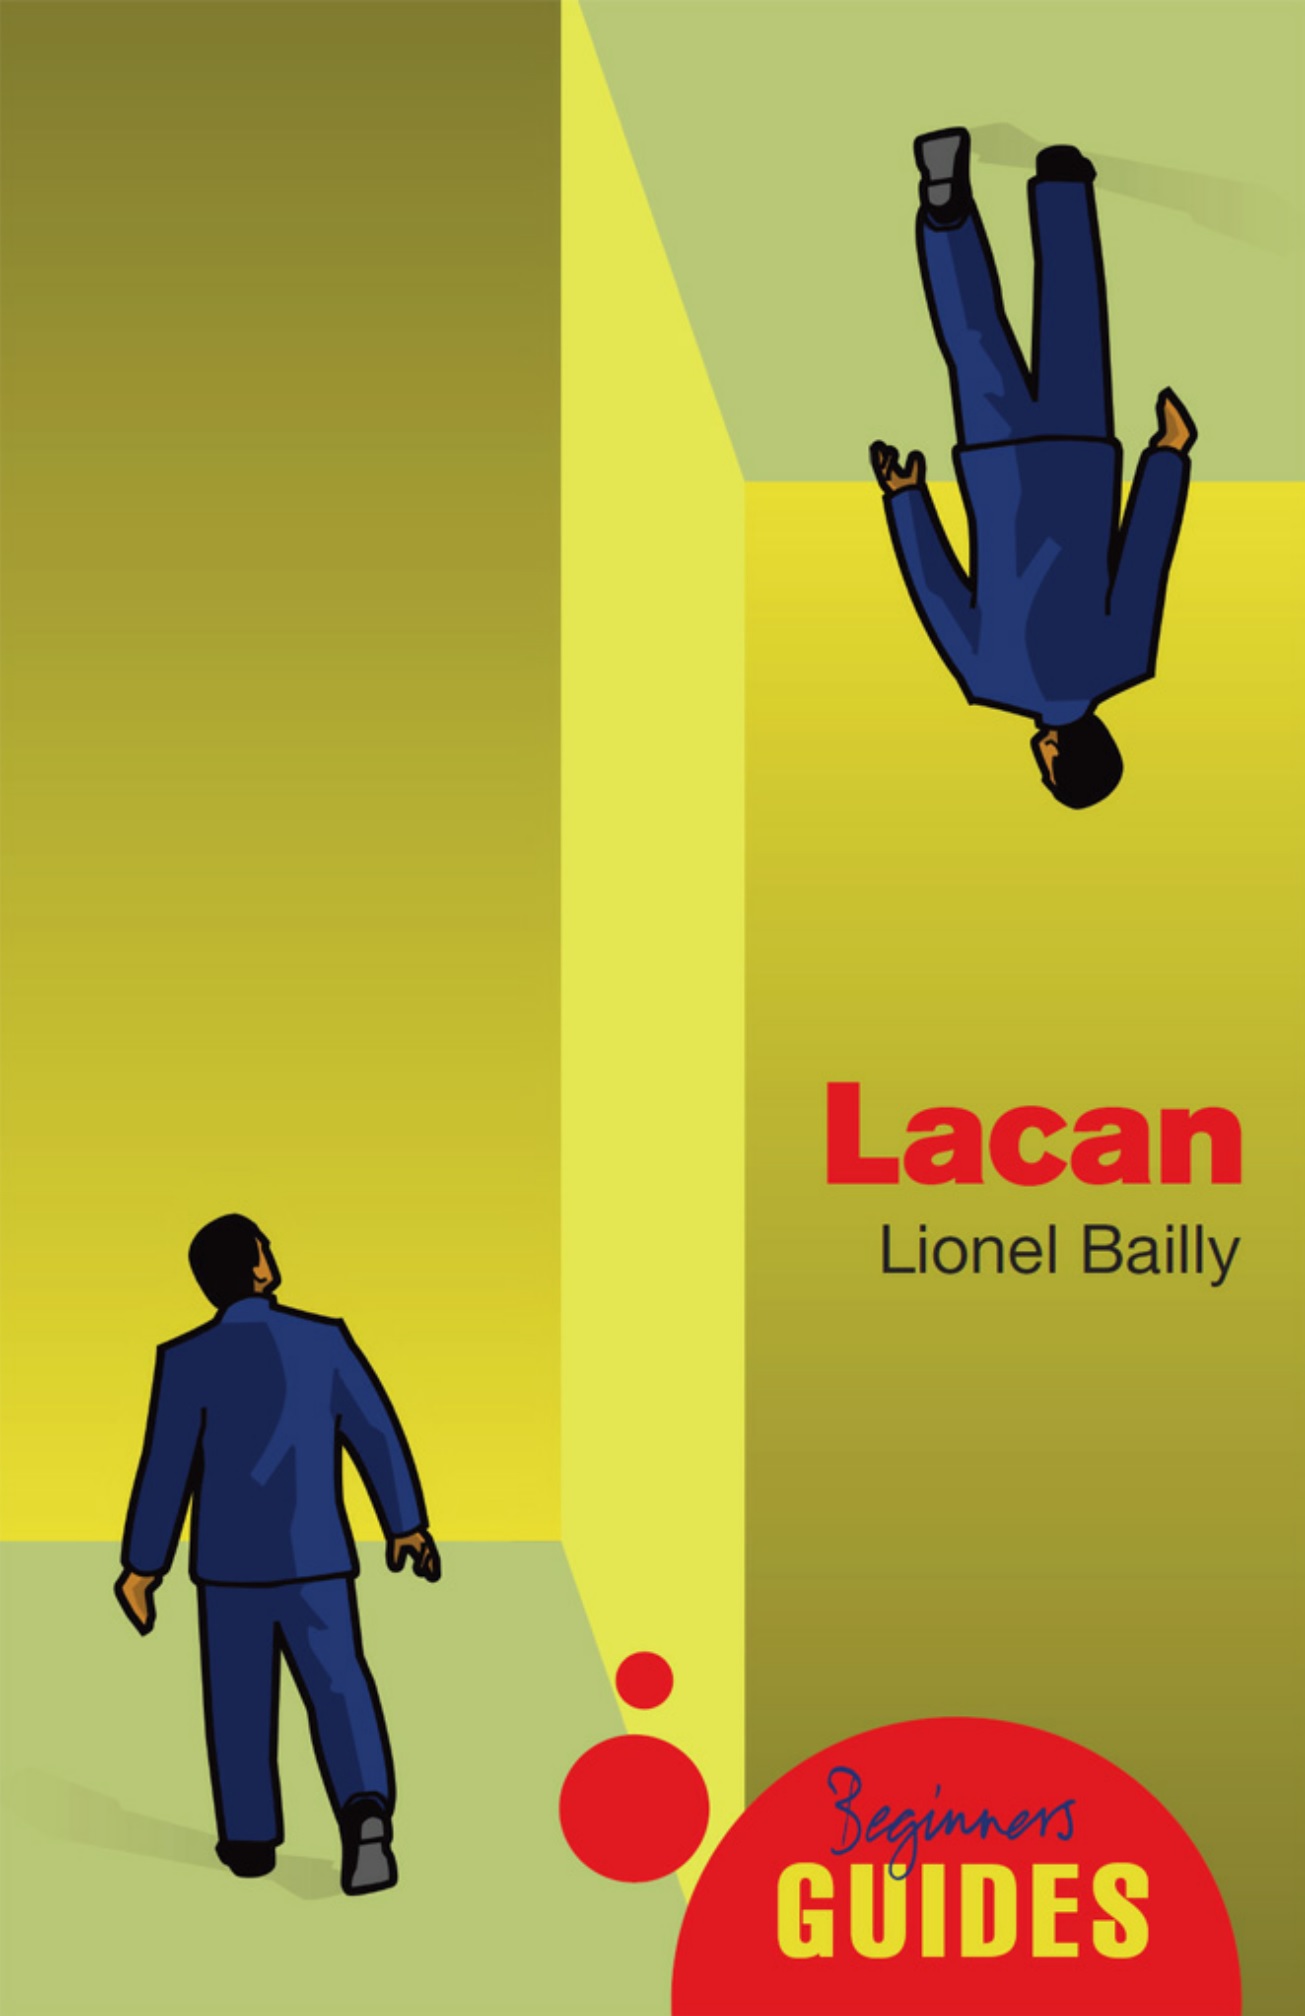 Lacan-a-beginners-guide-lionel-bailly.jpg